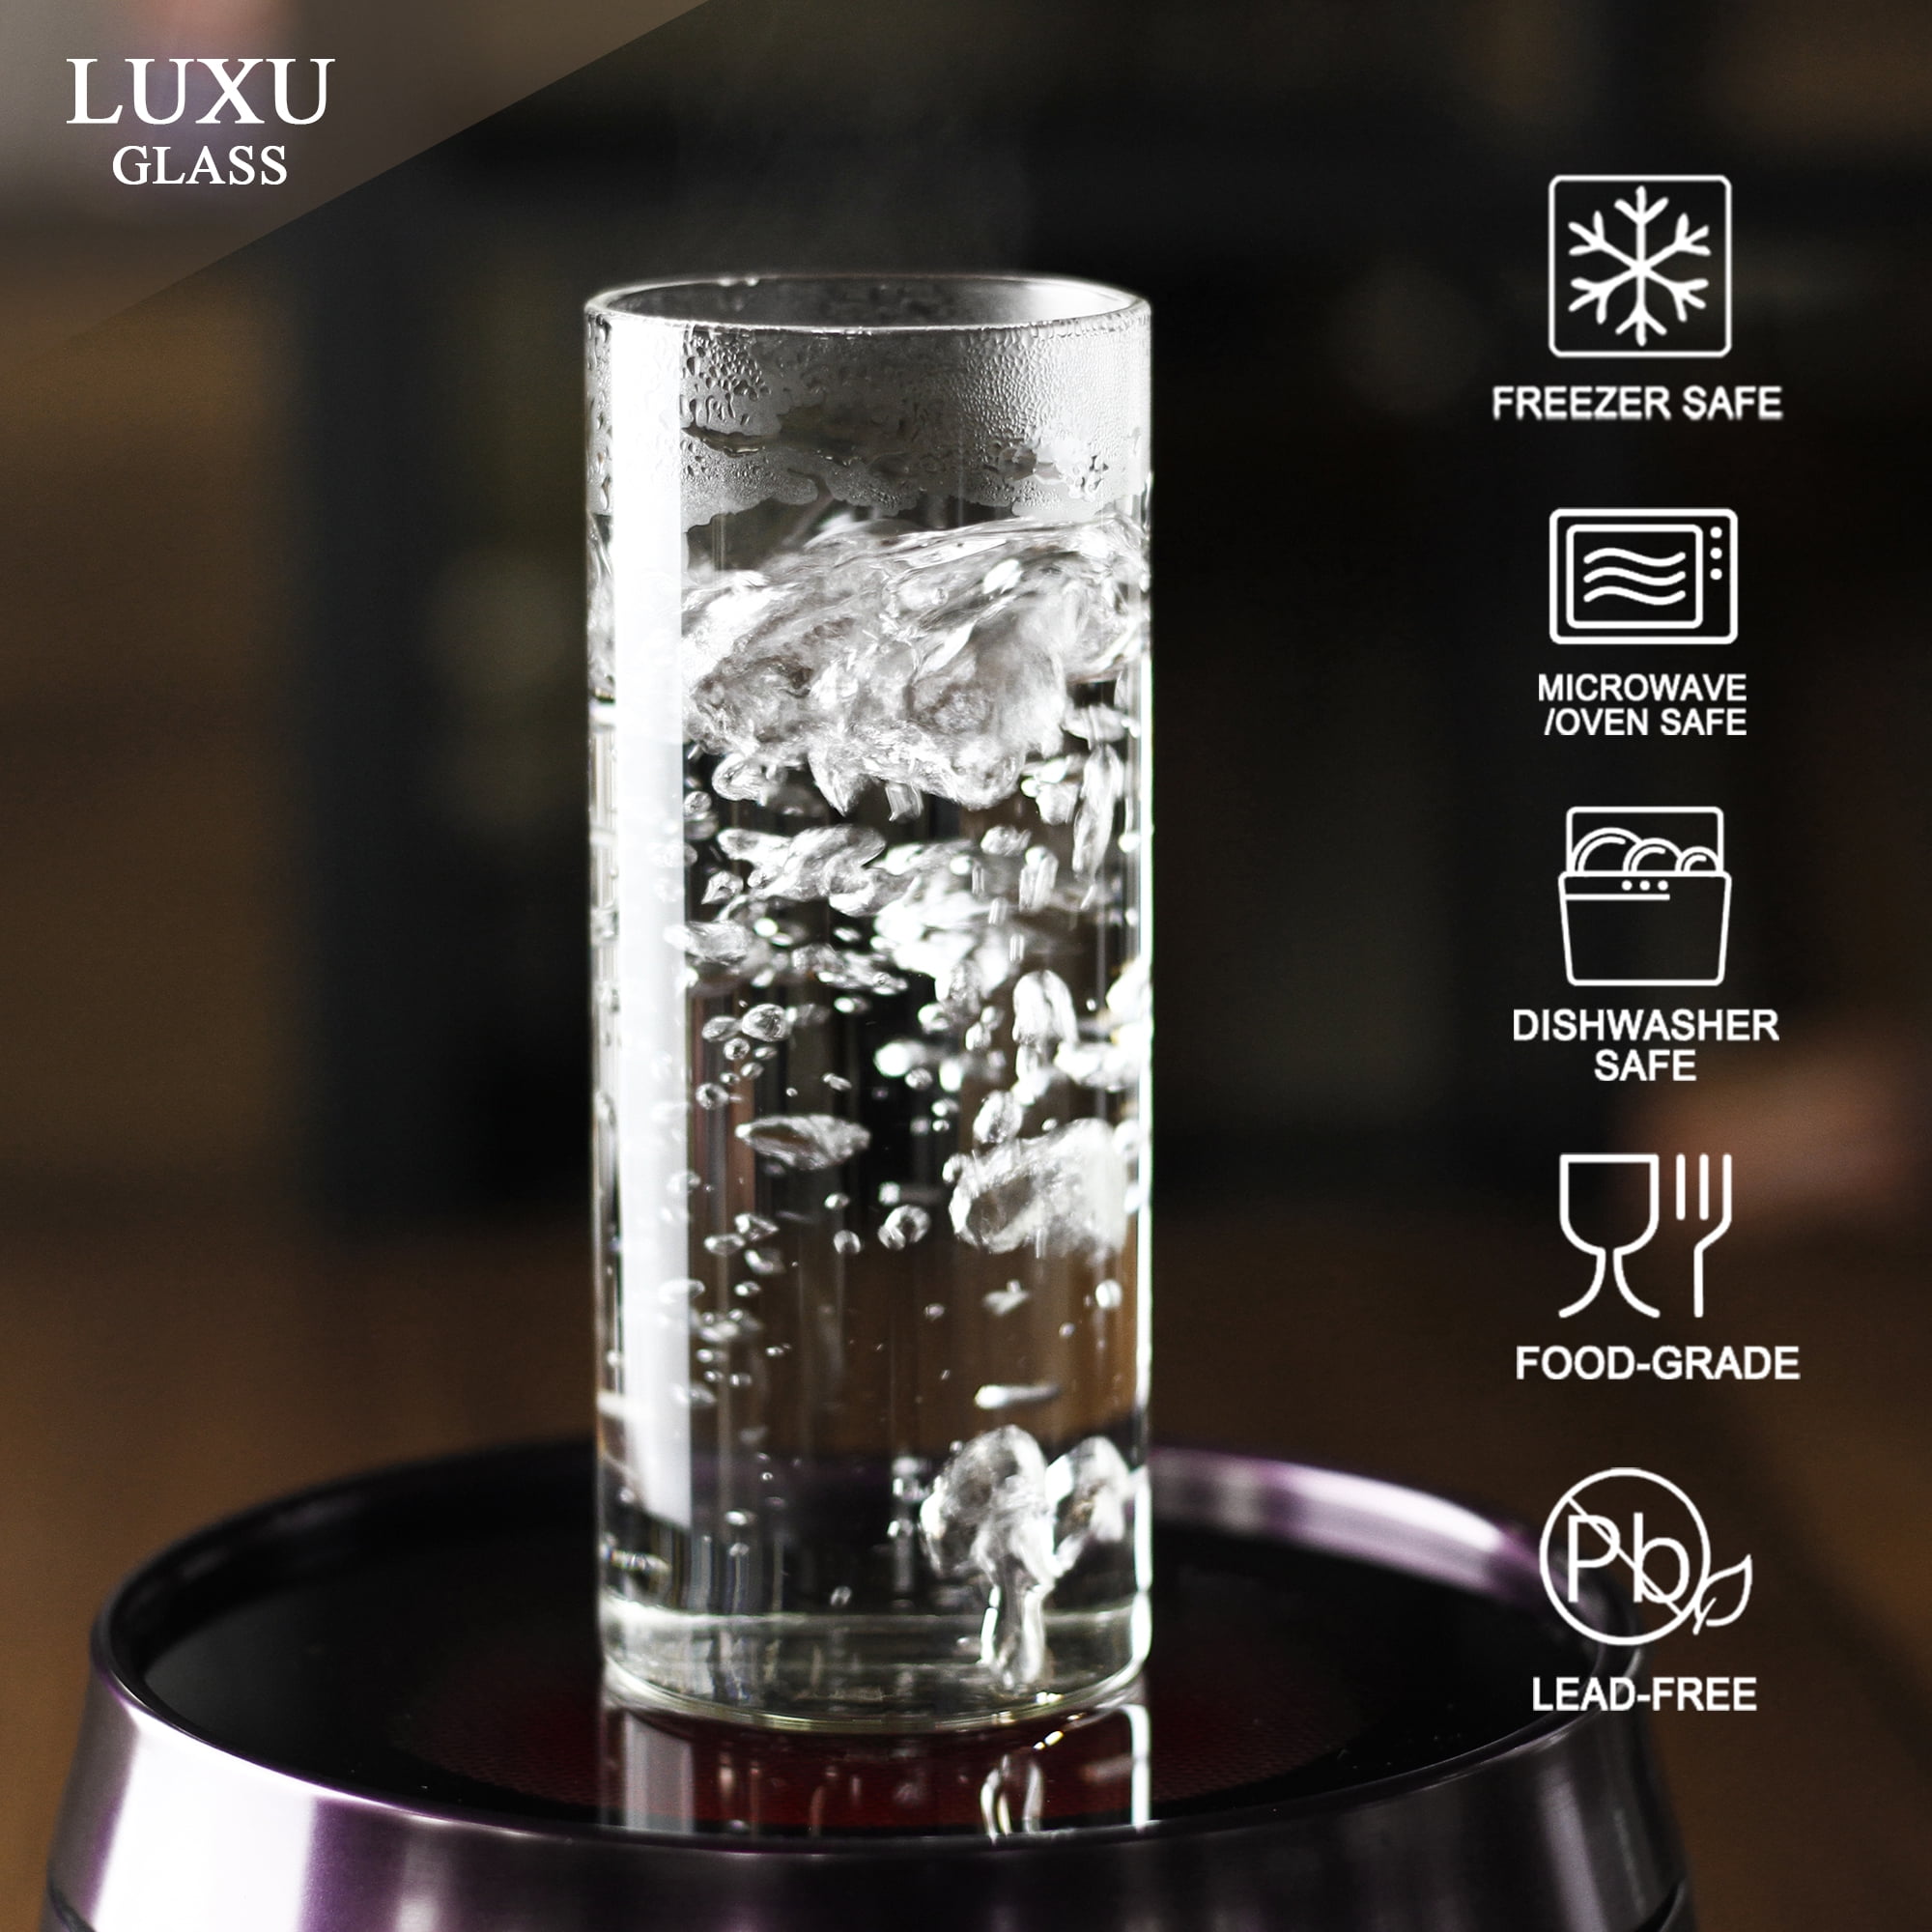 LUXU Drinking Glasses 19 oz, Thin Highball Glasses Set of 4,Clear Tall  Glass Cups For Water, Juice, …See more LUXU Drinking Glasses 19 oz, Thin